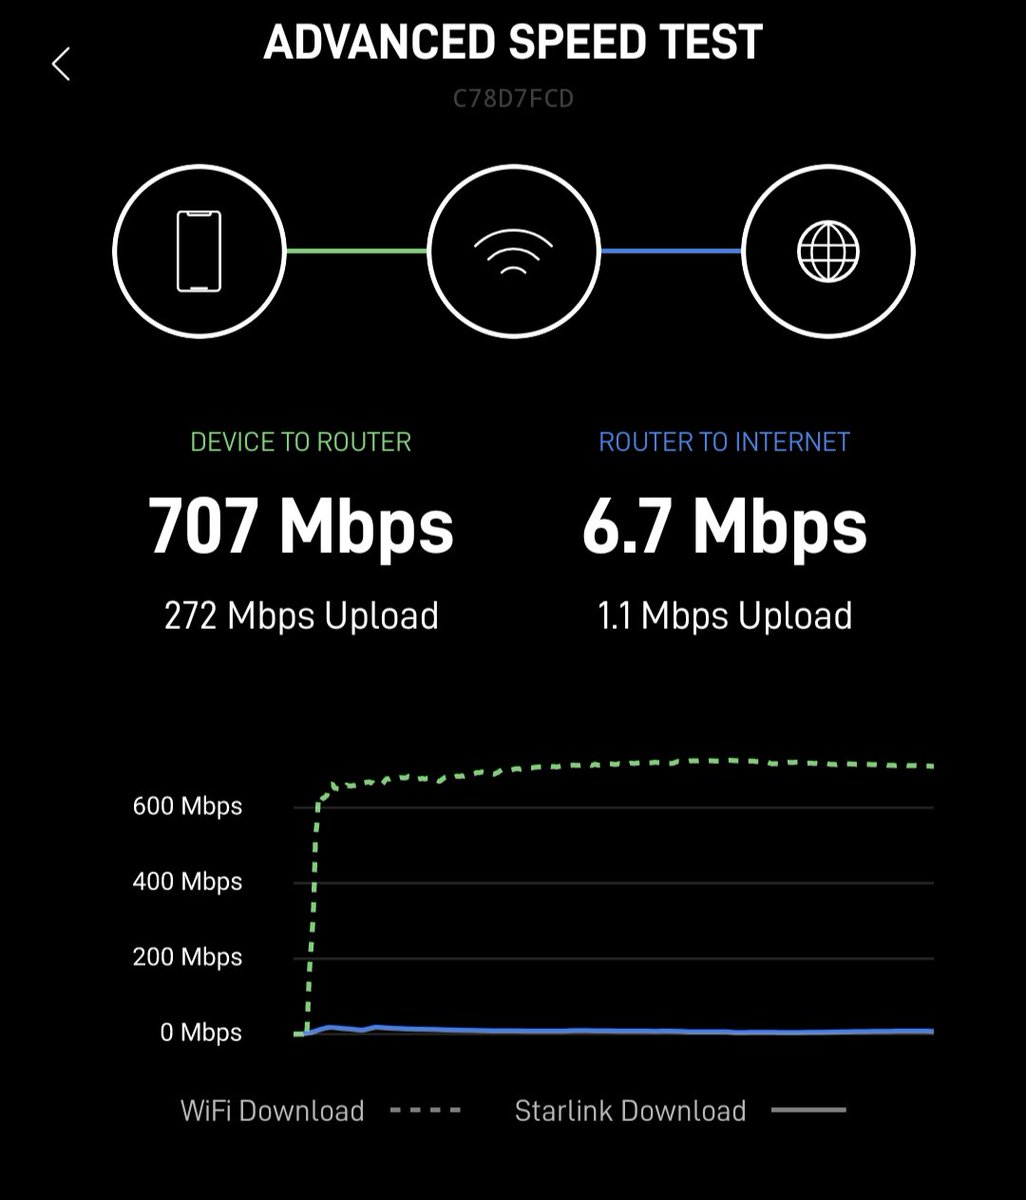 This is not what I had in mind when I switched to @Starlink in November. My 5 year old LTE phone currently has better bandwidth and latency than my home Internet...